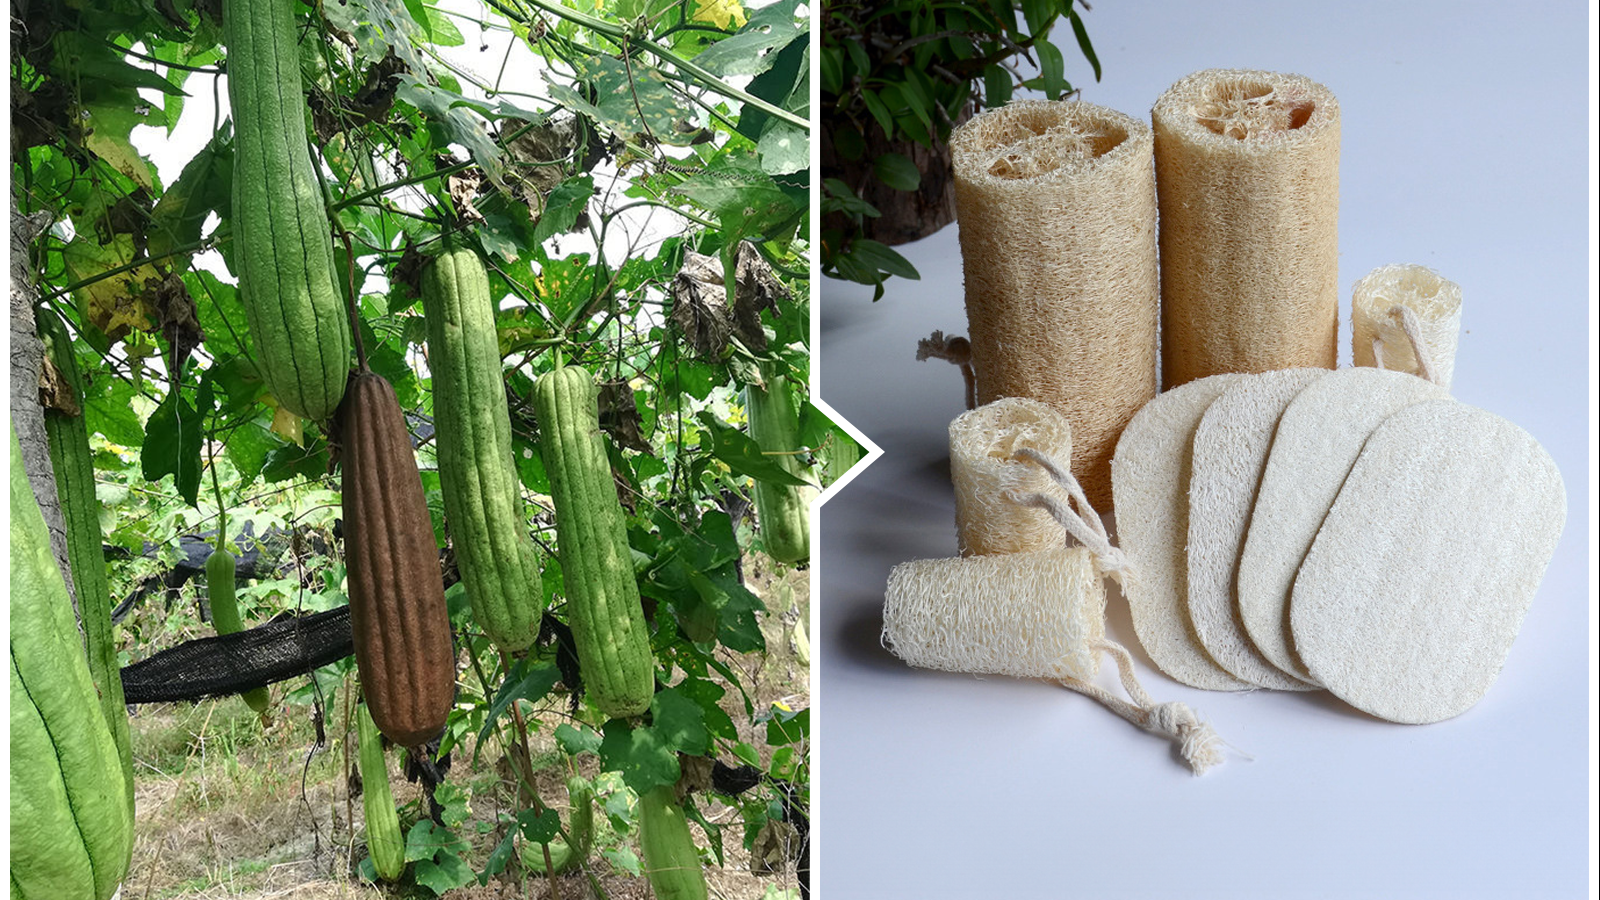 Loofah sponges are made from the fibrous interior of the loofah gourd.